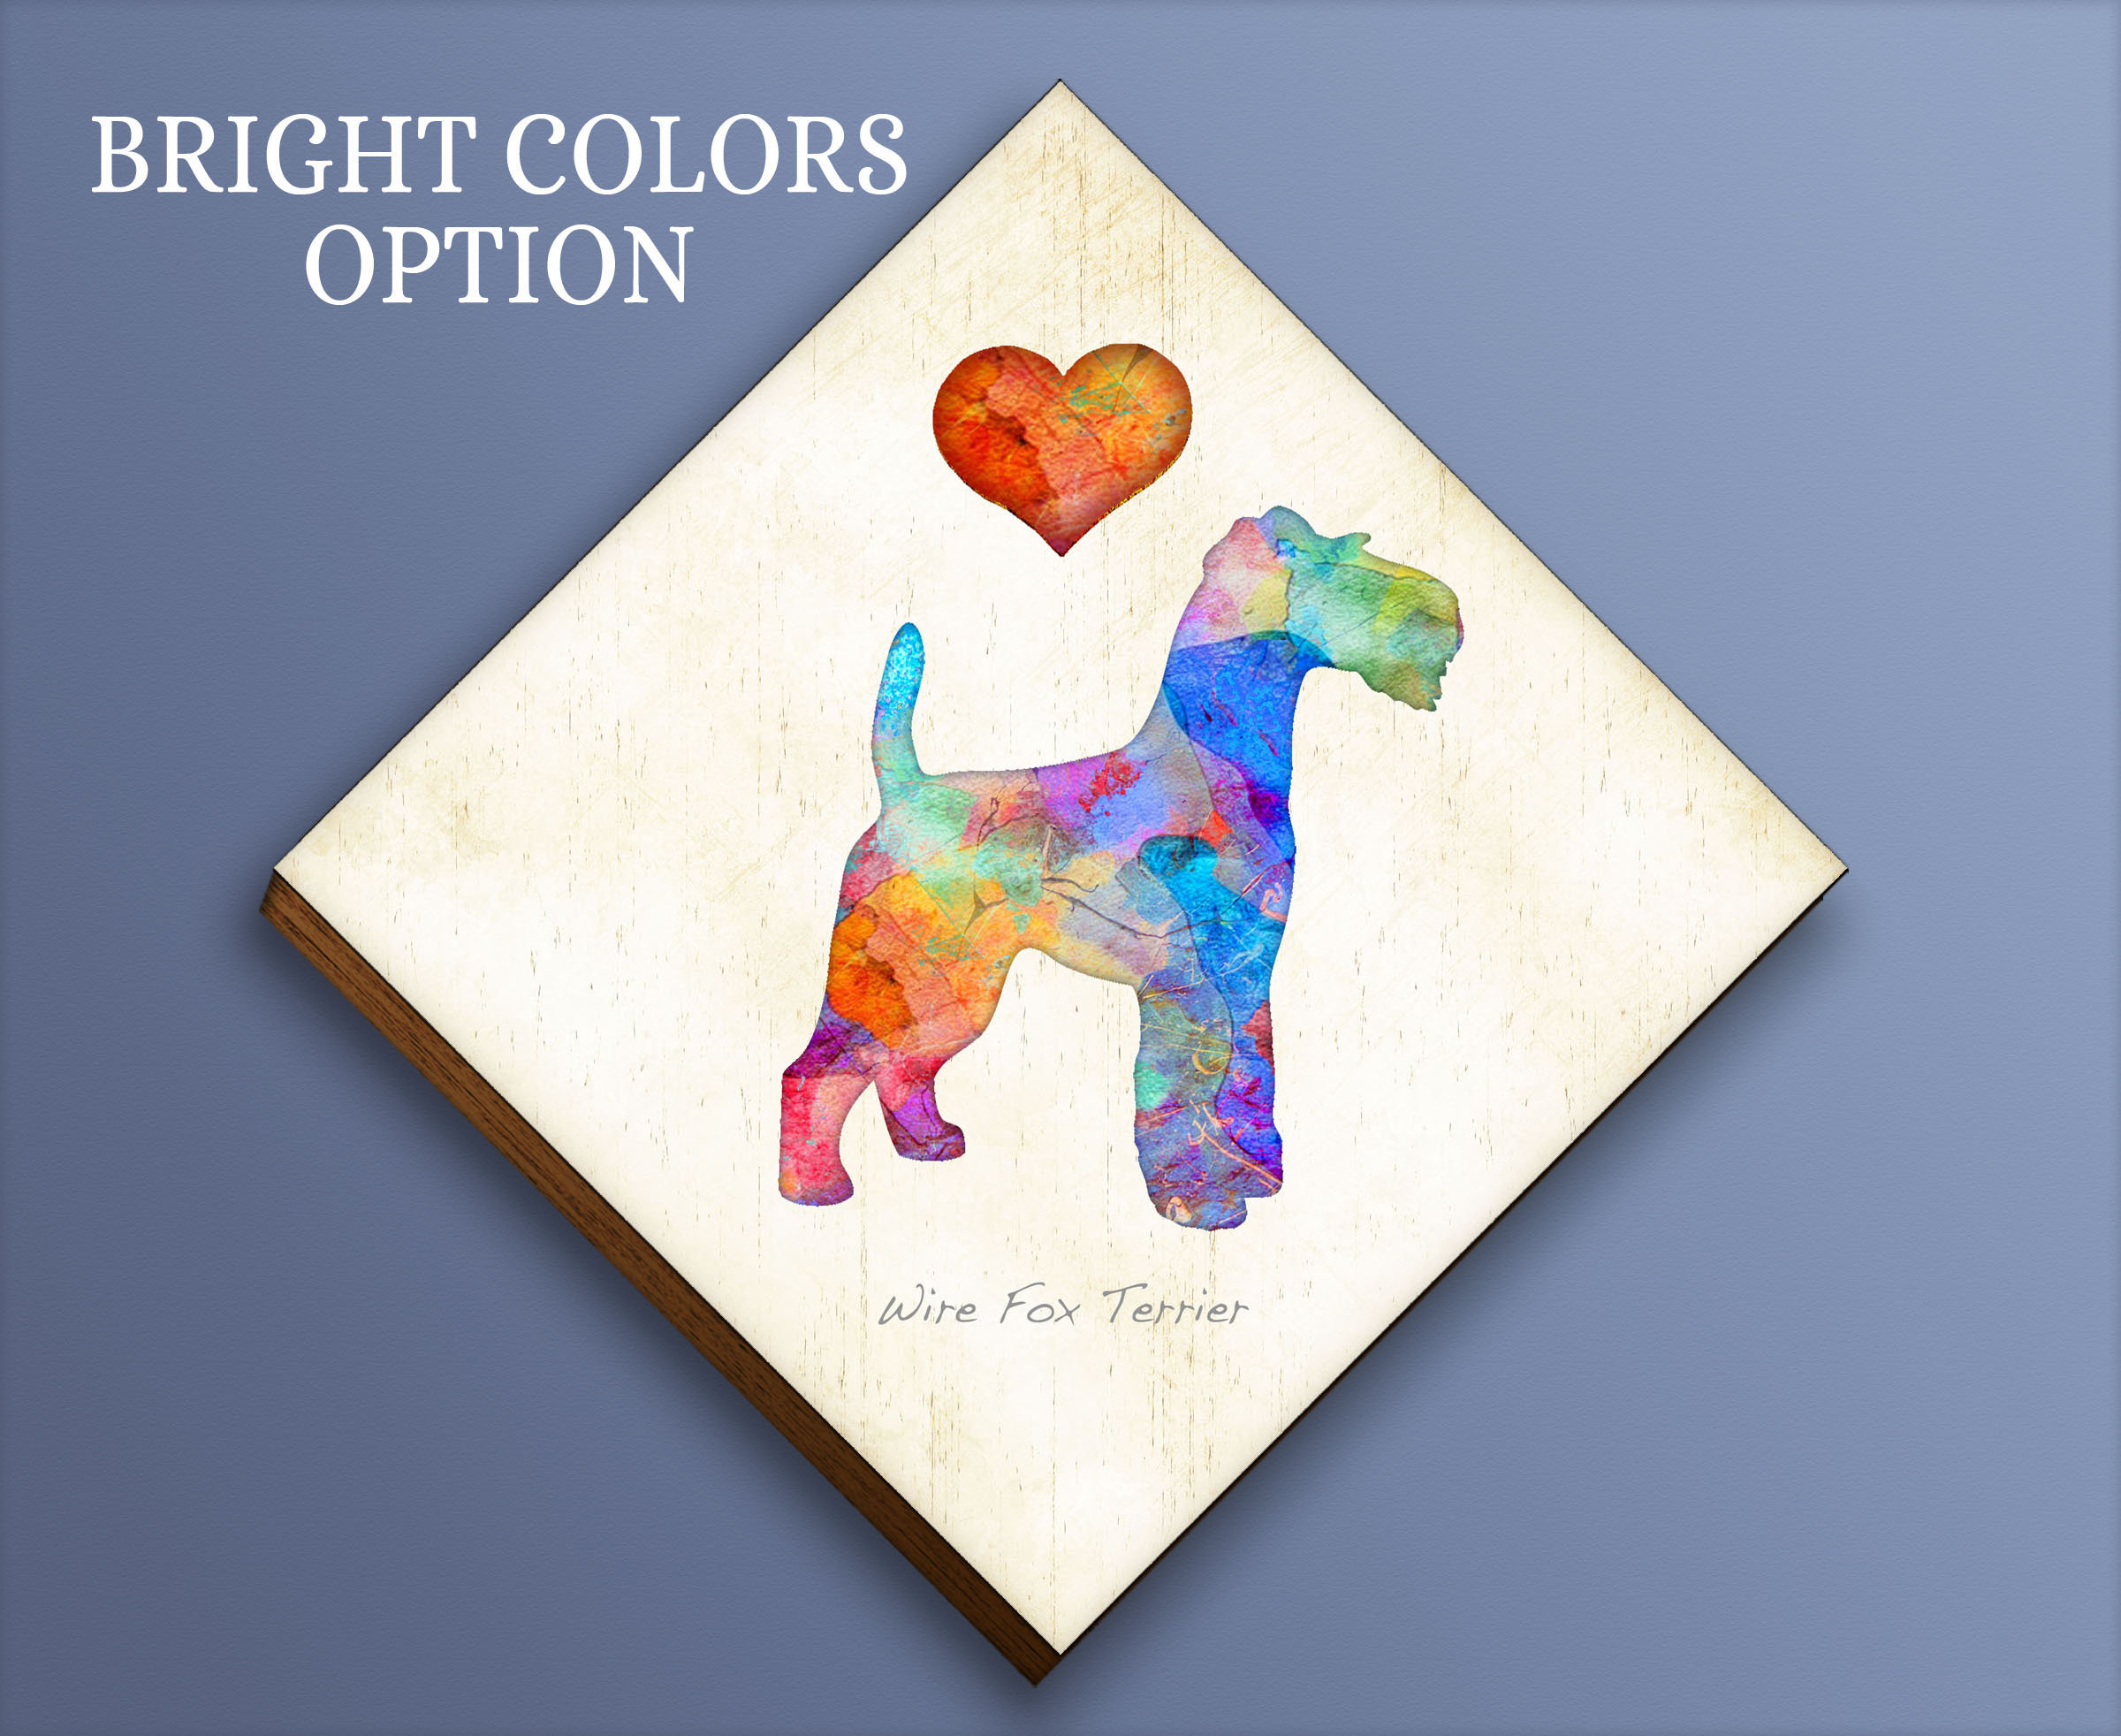 Personalize Wire Fox Terrier Dog Breed Watercolor Art Print by Dan Morris In Loving Remembrance Option Choose color Add dog's name